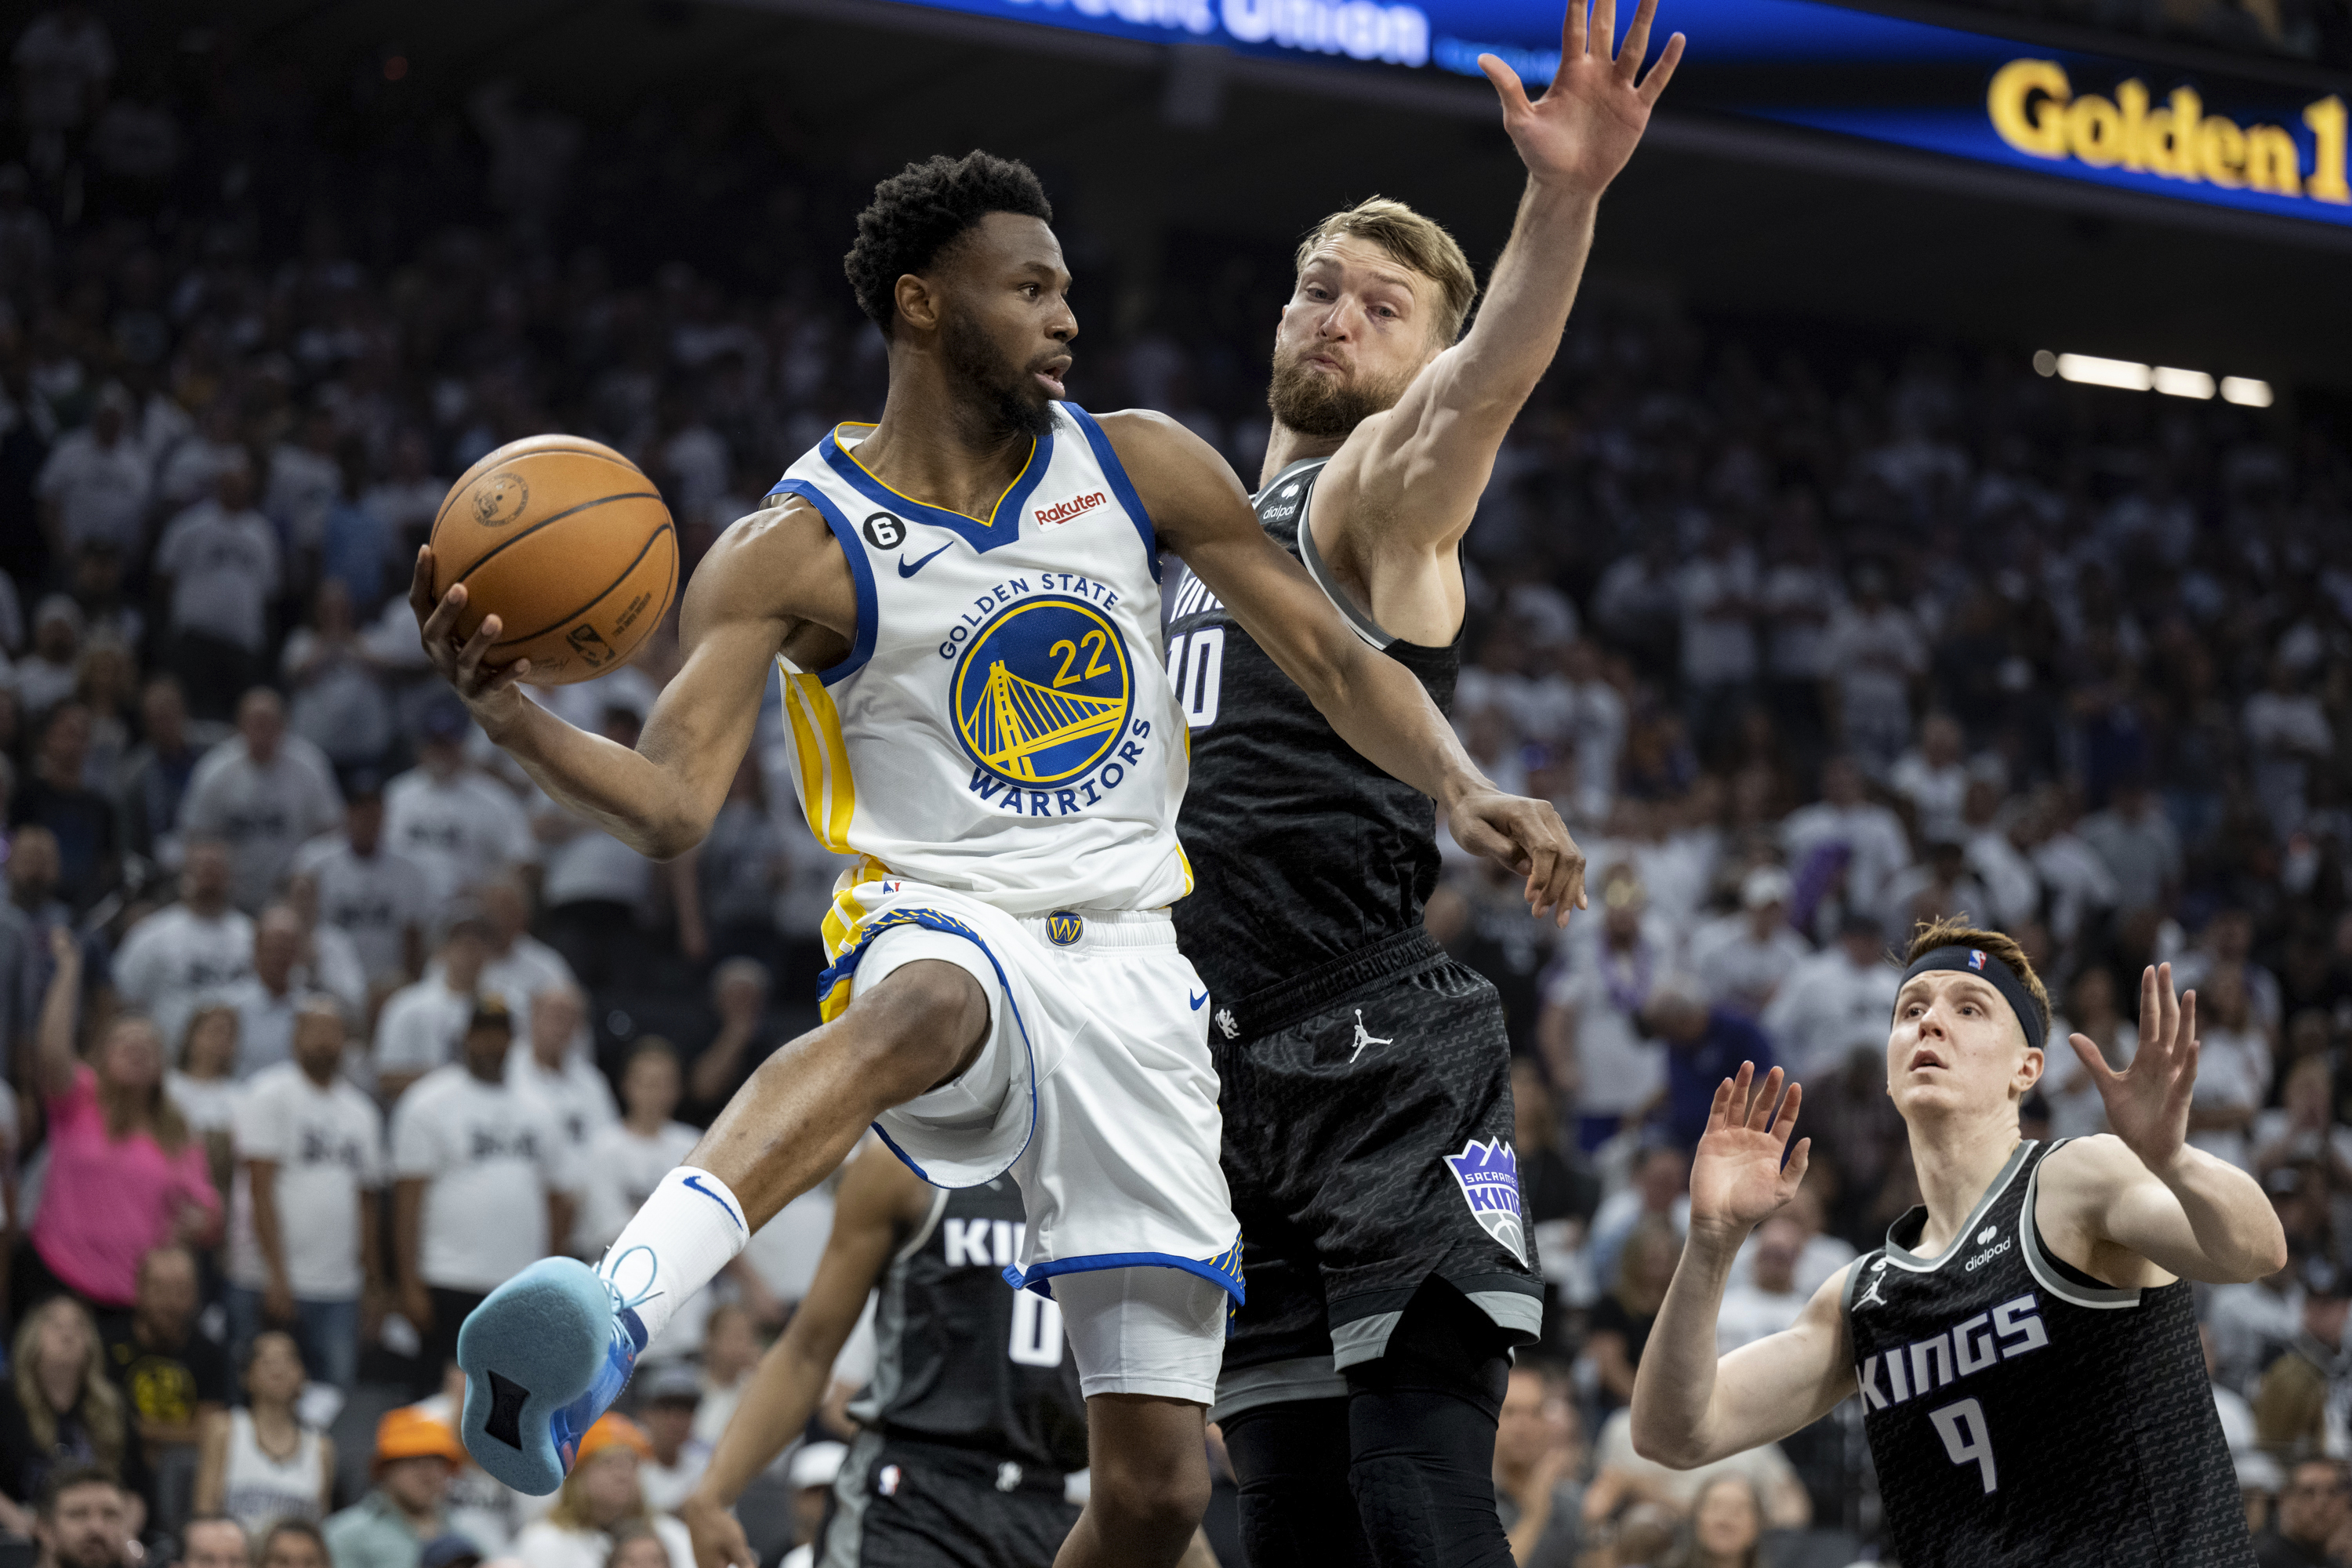 De'Aaron Fox drops 38, lights the beam as Kings take Game 1 win over  Warriors to open NBA playoffs